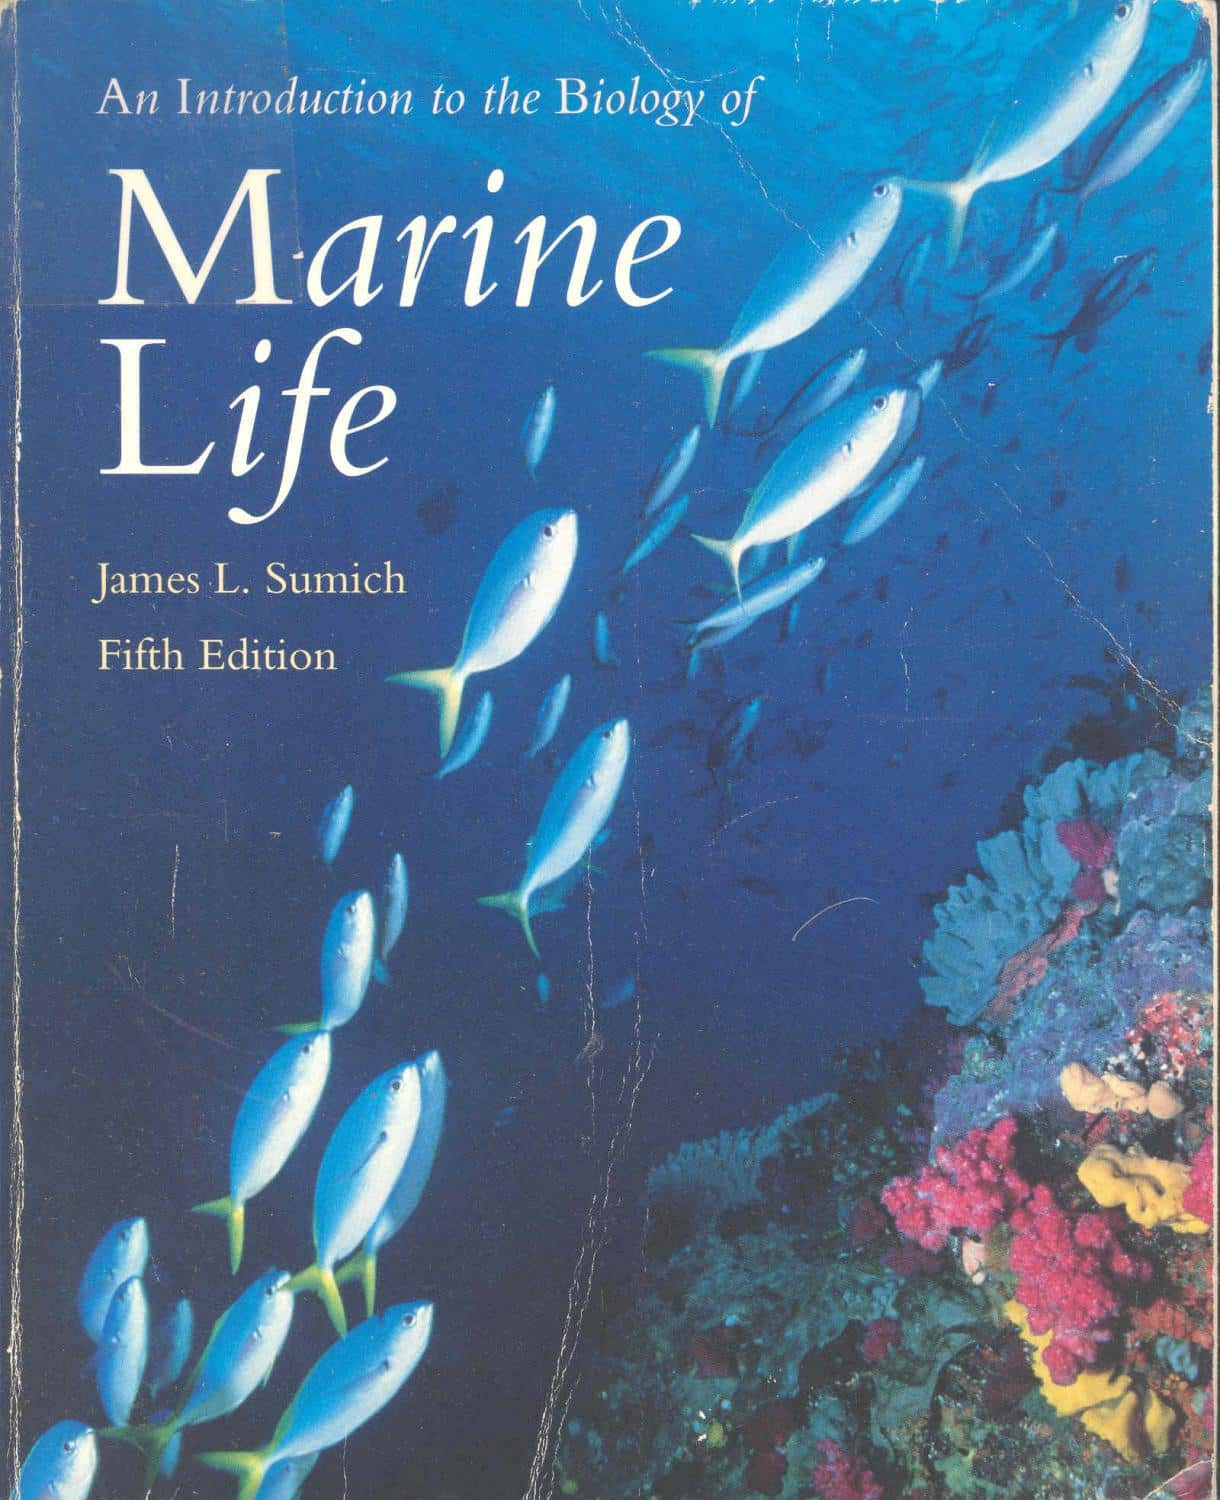 An Introduction to the Biology of Marine Life James L. Sumich